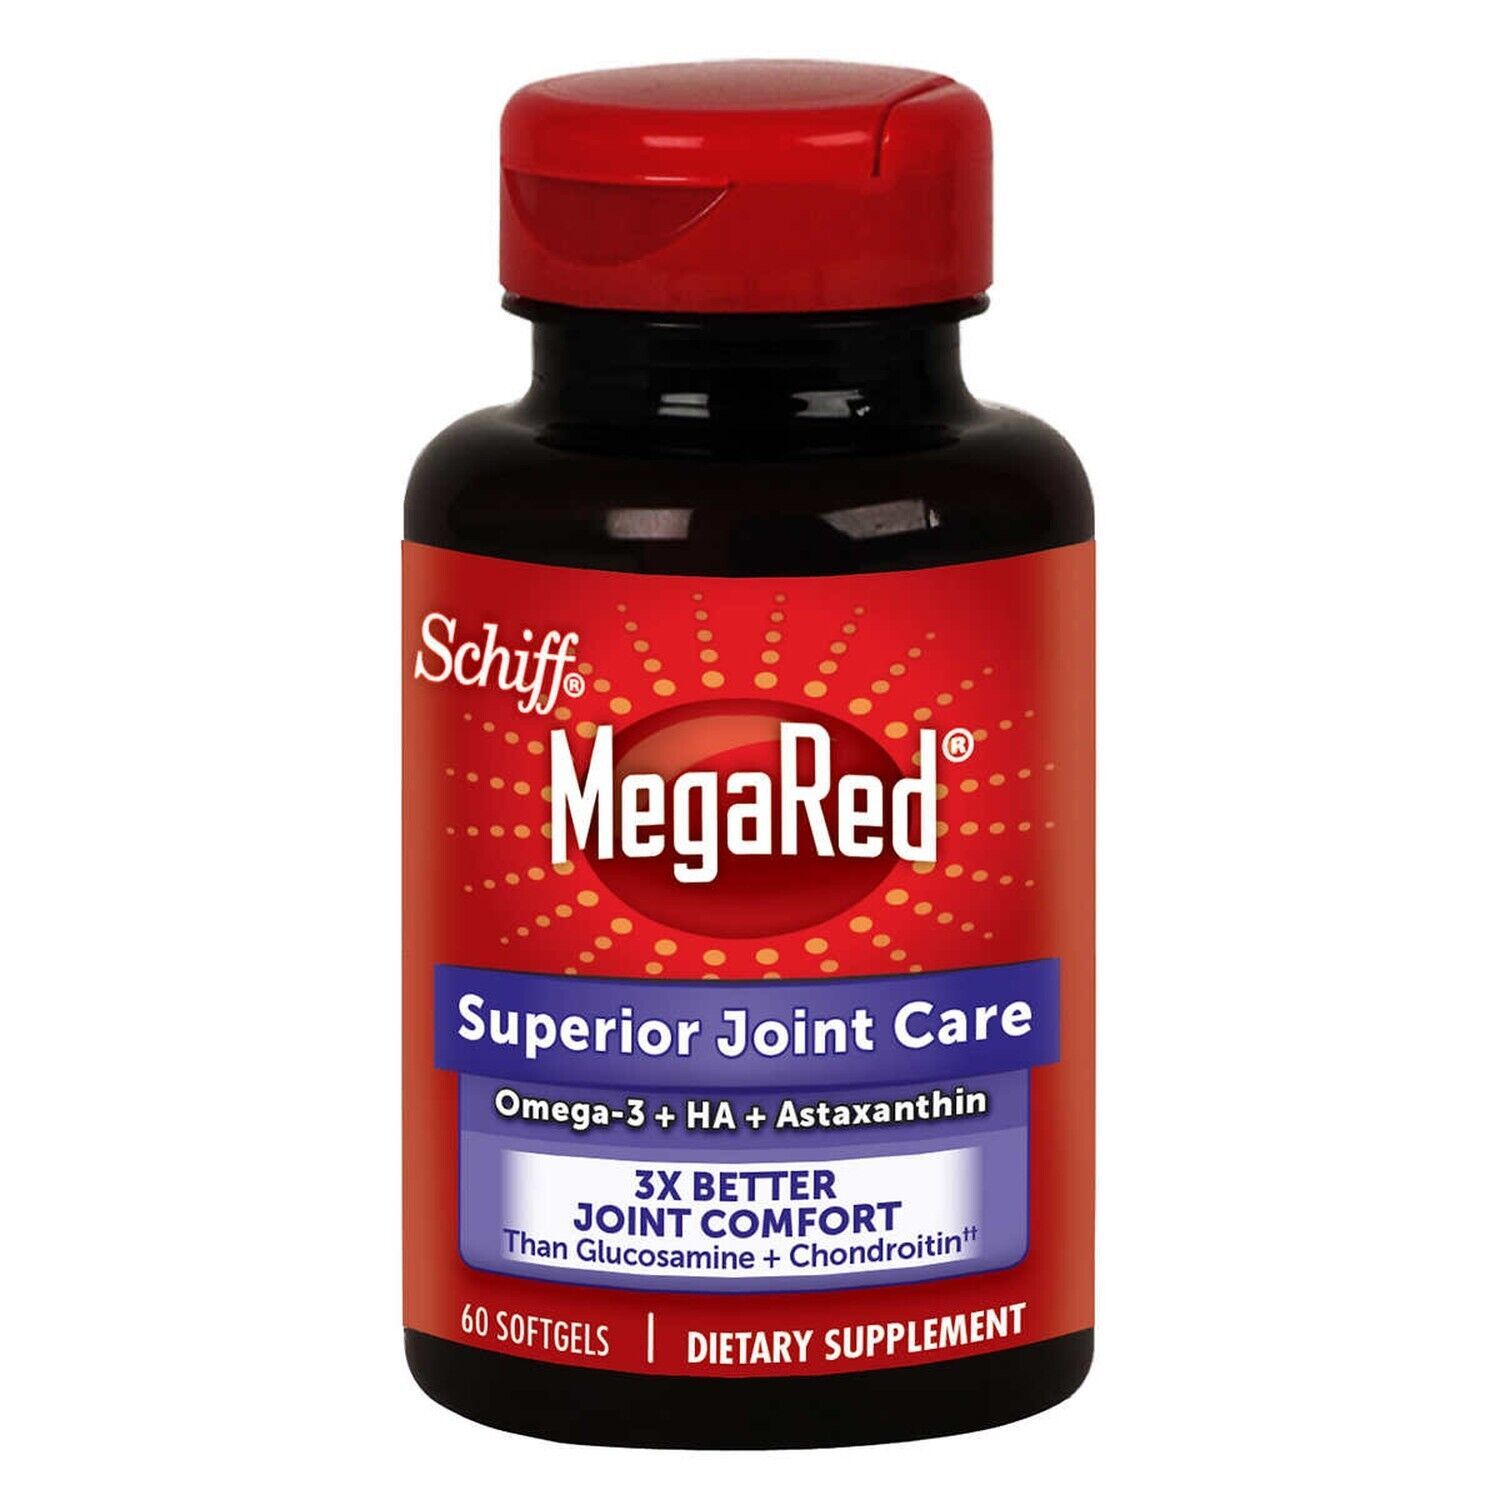 MEGARED KRILL OIL MEGA RED SCHIFF OMEGA 3 SUPERIOR JOINT CARE 350 MG ~ 60 COUNT - $42.99